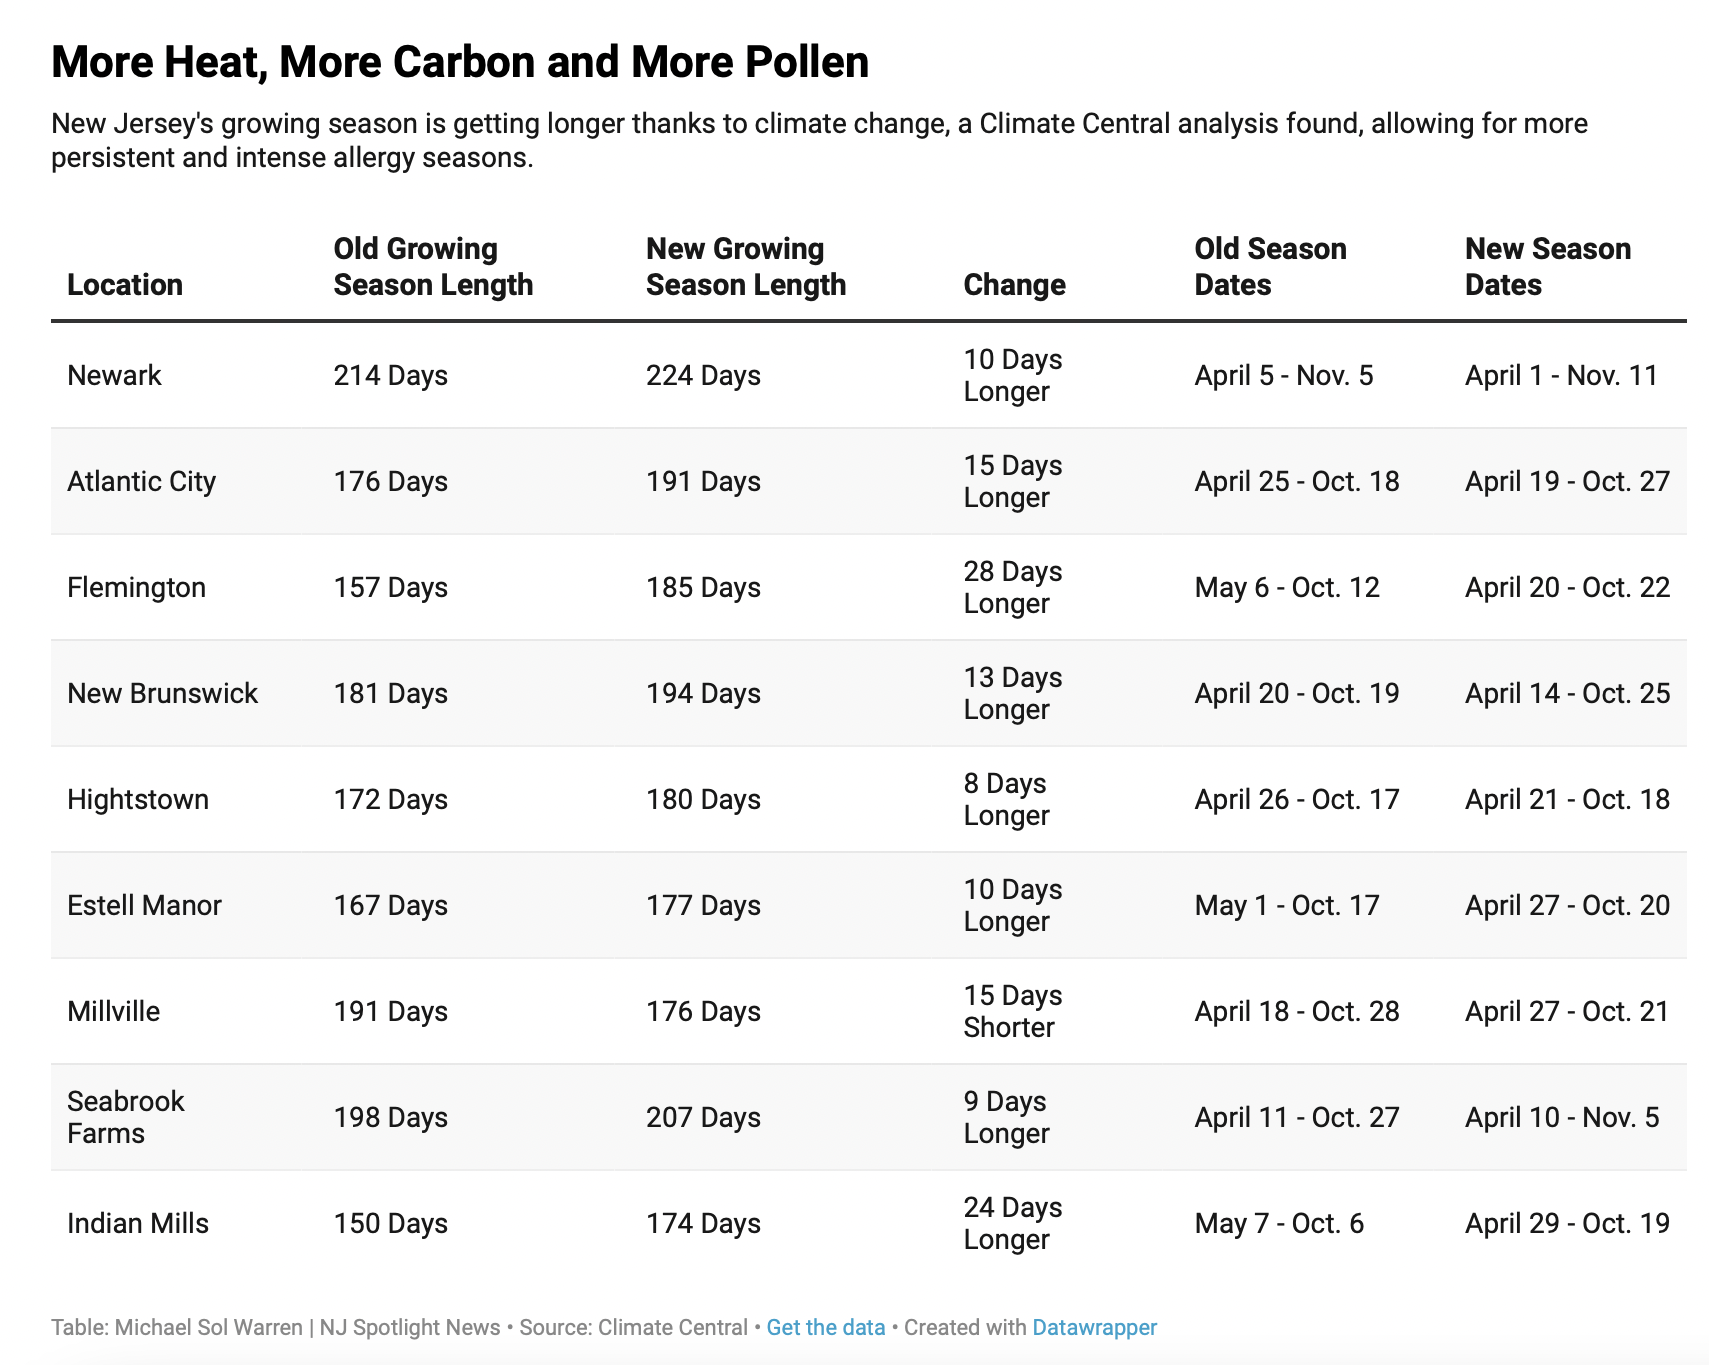 Table: Michael Sol Warren | NJ Spotlight News  Source: Climate Central  Get the data  Created with Datawrapper